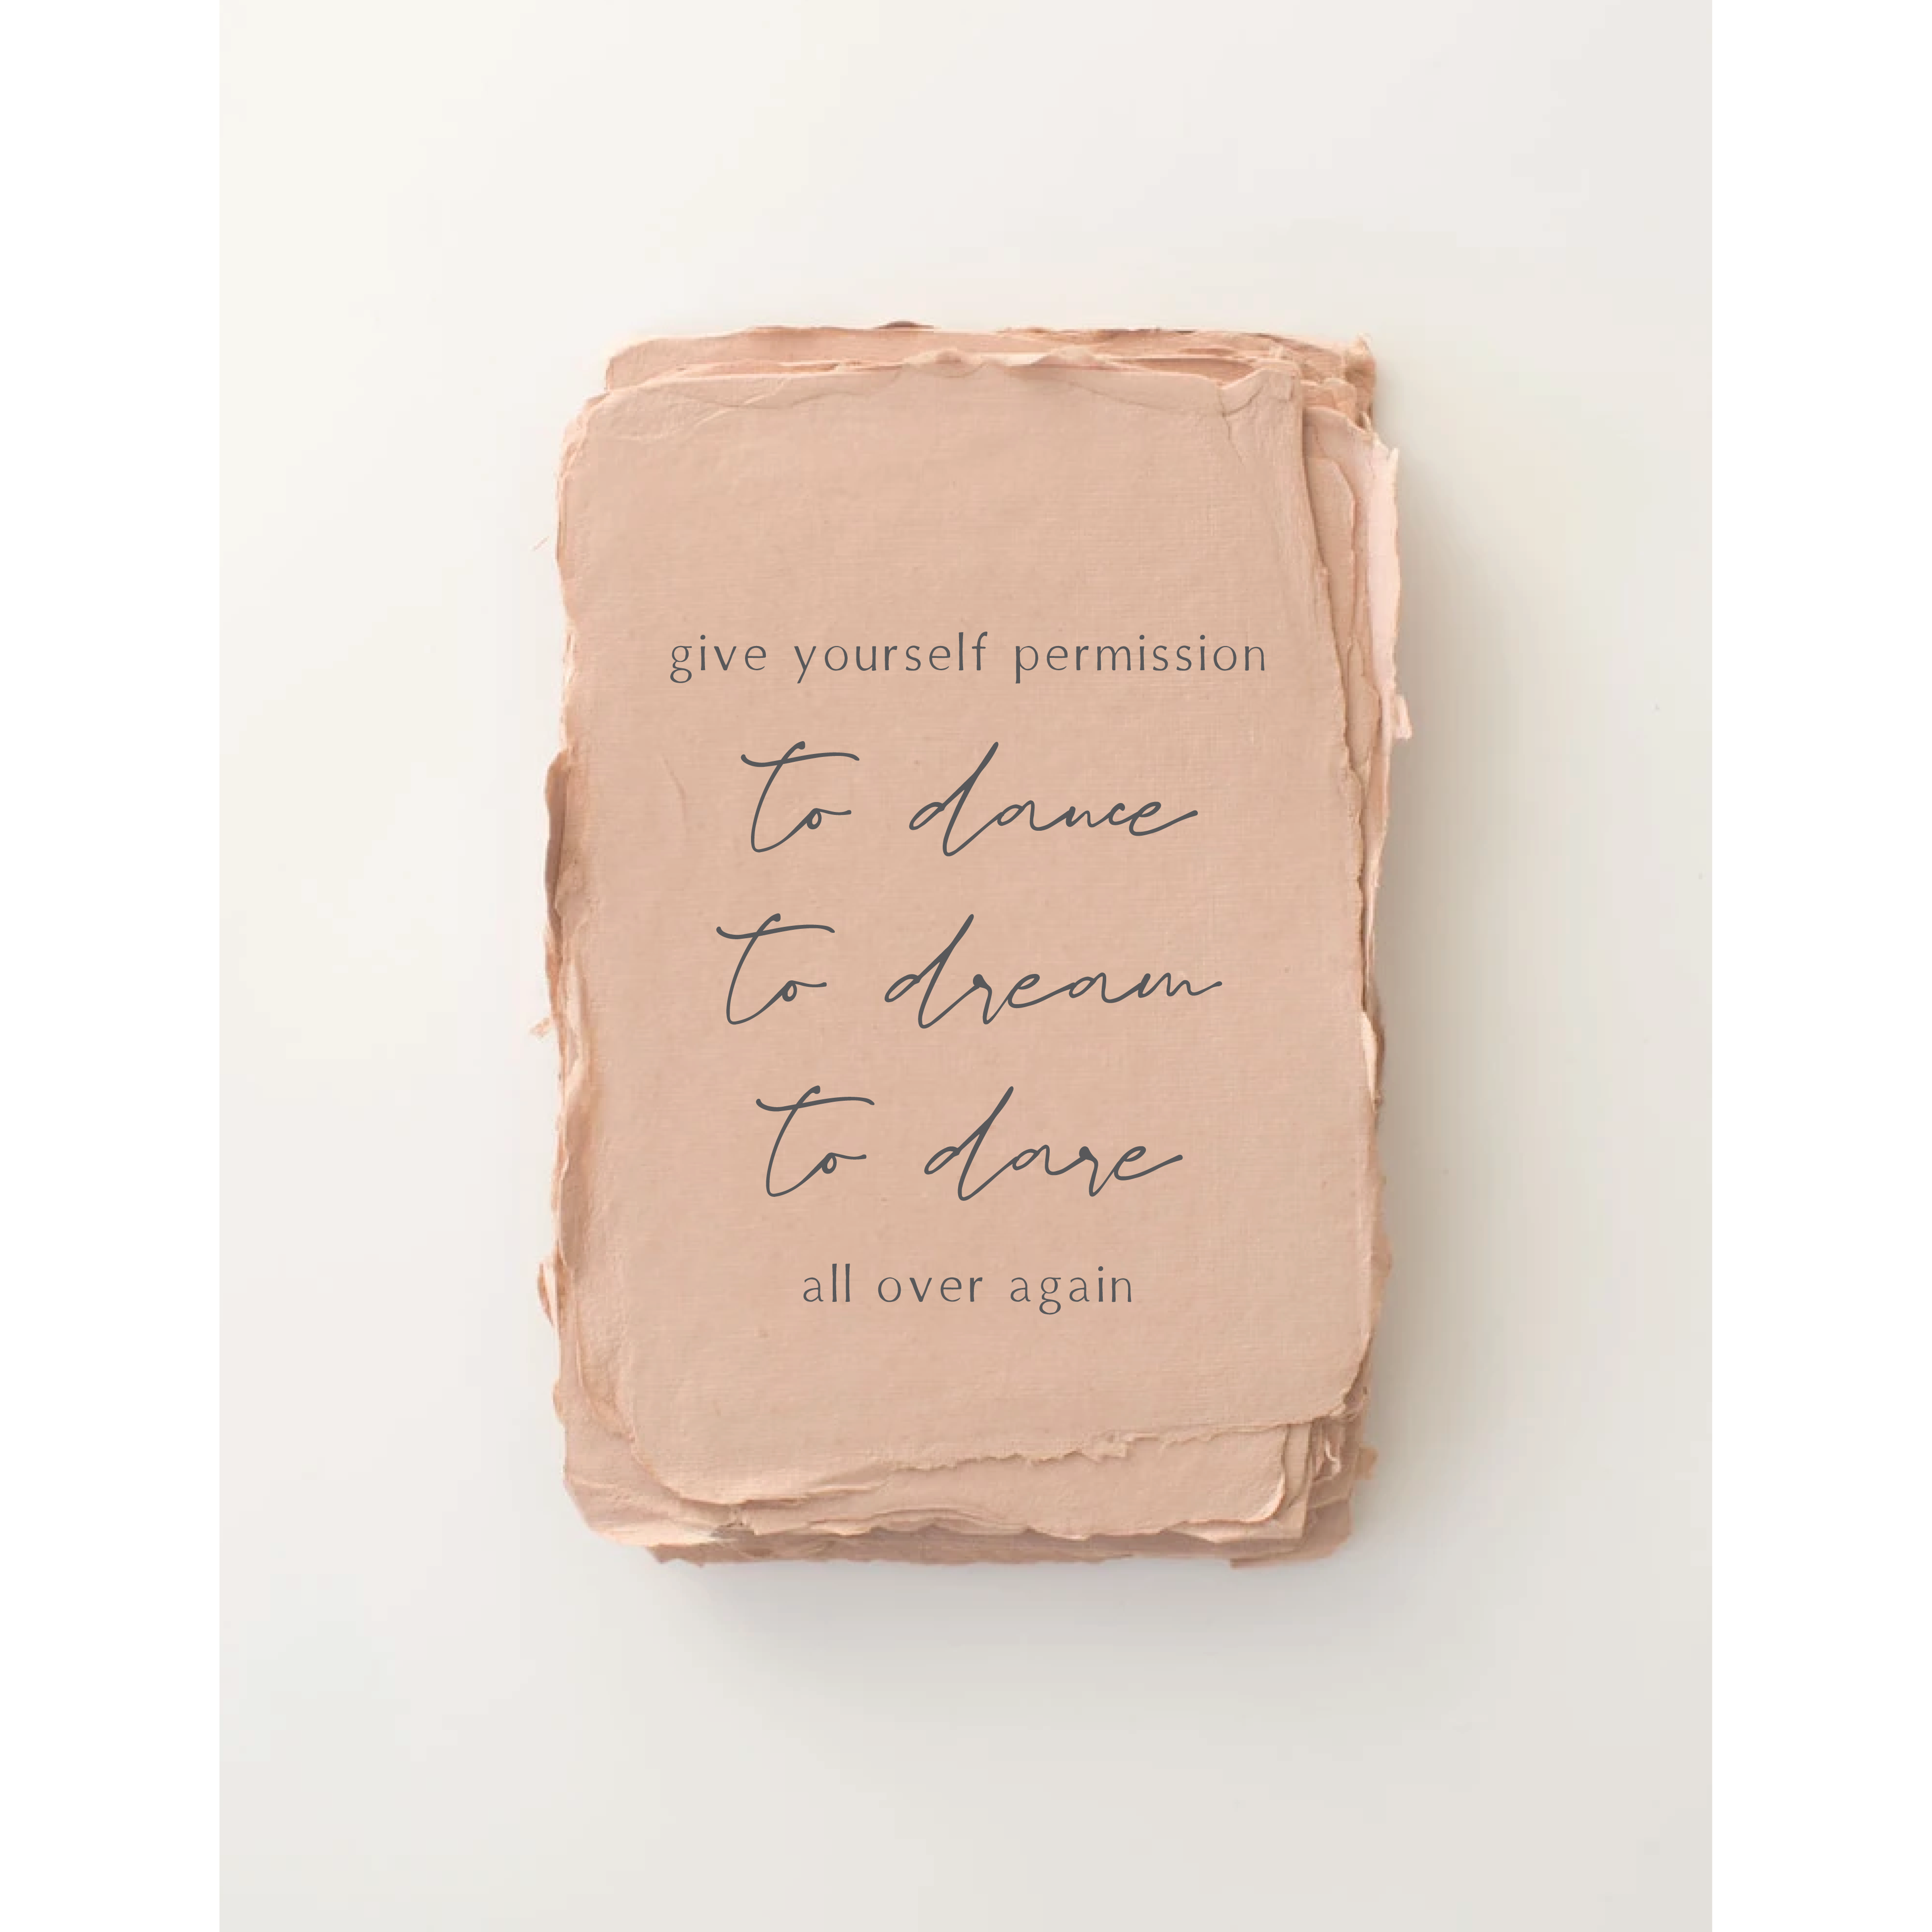 "Permission to Dance, Dream, Dare" Encouraging Greeting Card